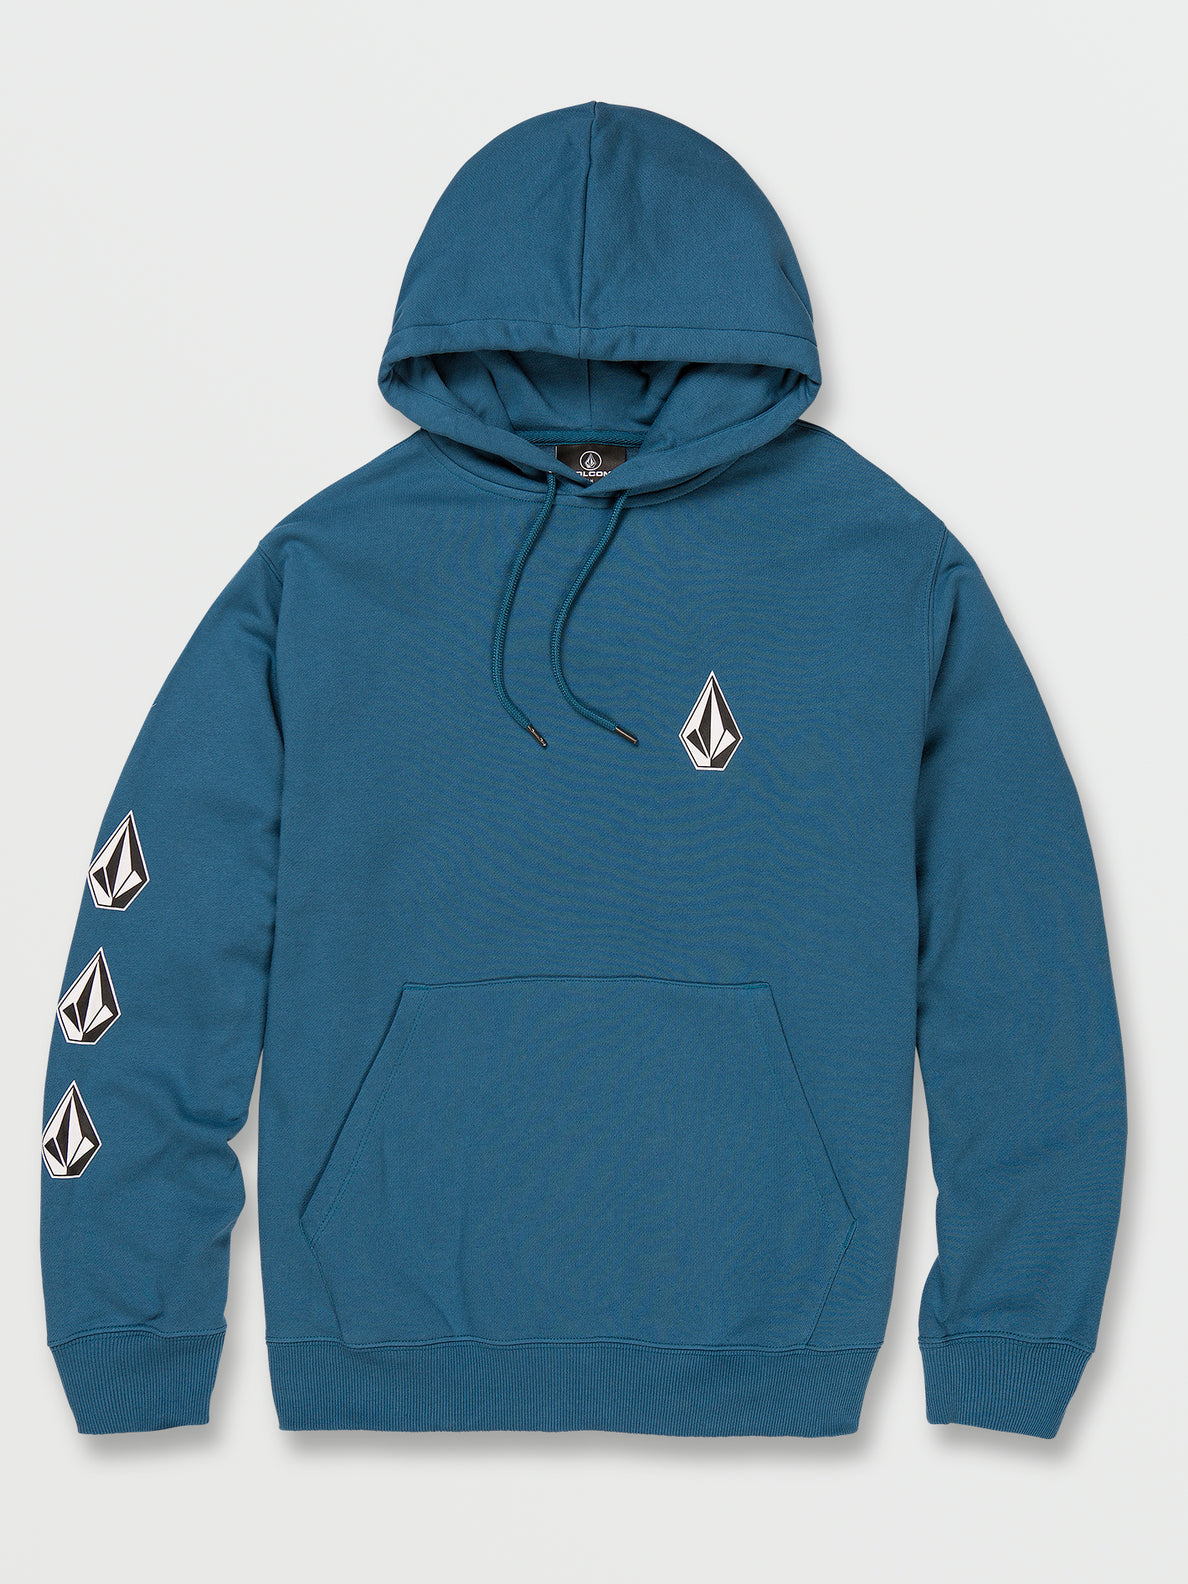 Iconic Stone Pullover Hoodie - Aged Indigo (A4112314_AIN) [F]